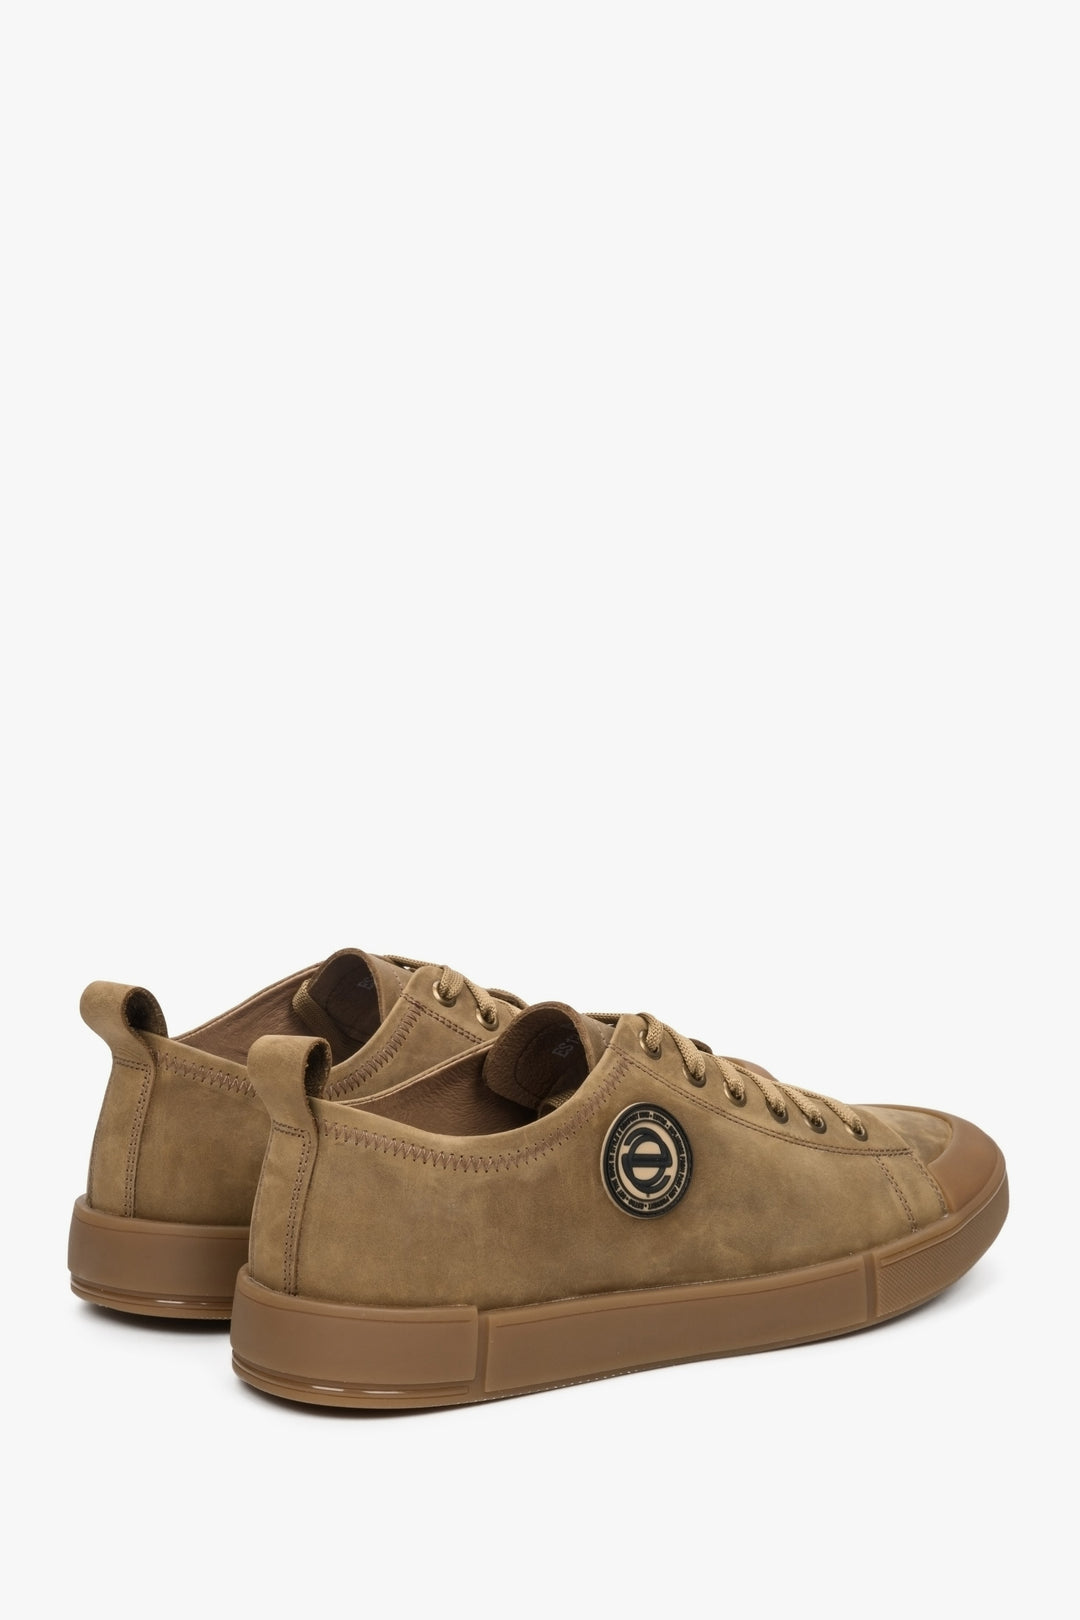 Men's sneakers made of natural brown nubuck by Estro - presentation of the heel and side seam of the shoe.